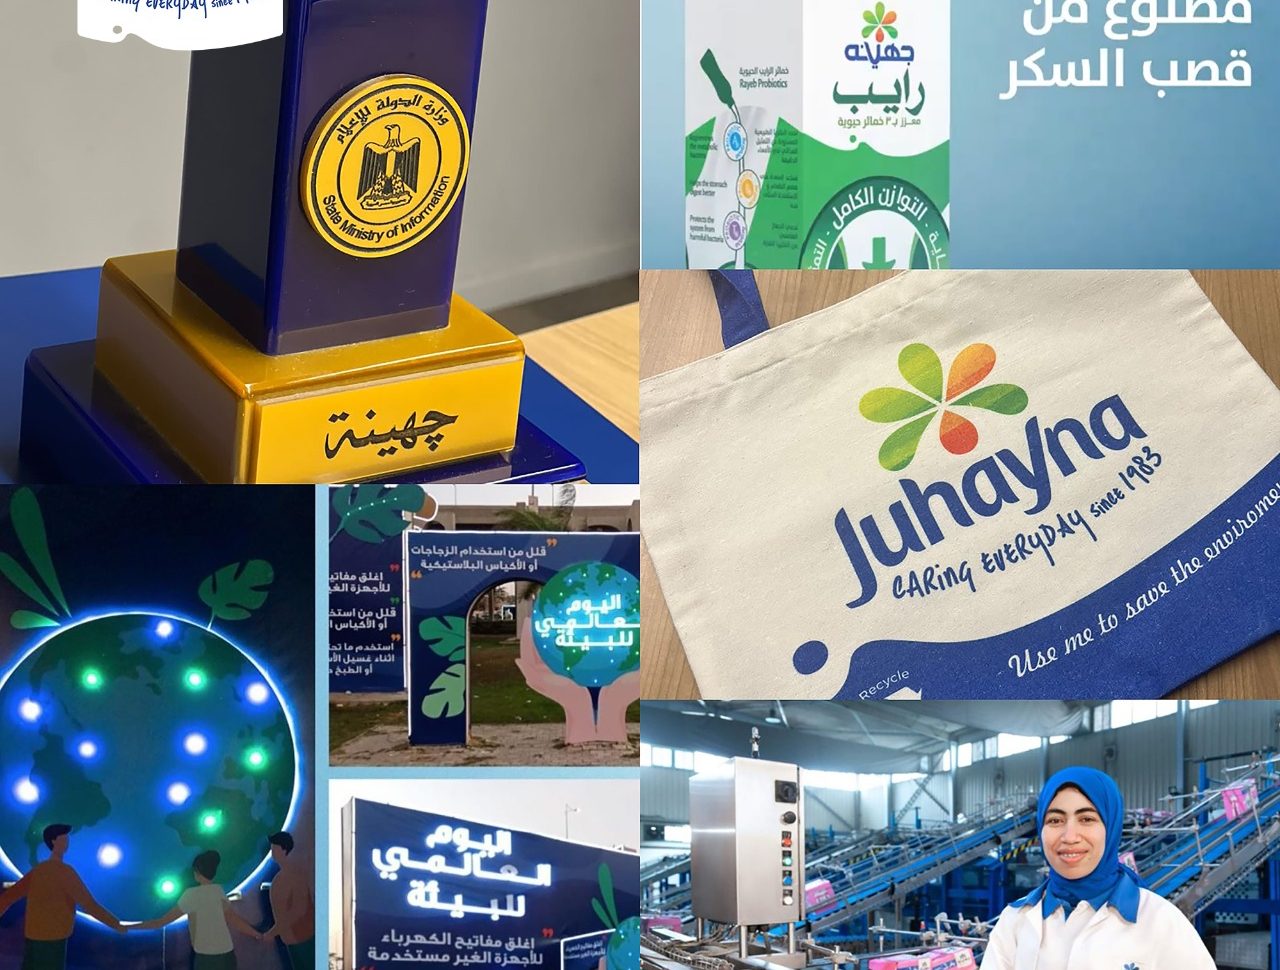 Juhayna plans to reduce CO2 emissions by 31.8% by 2026